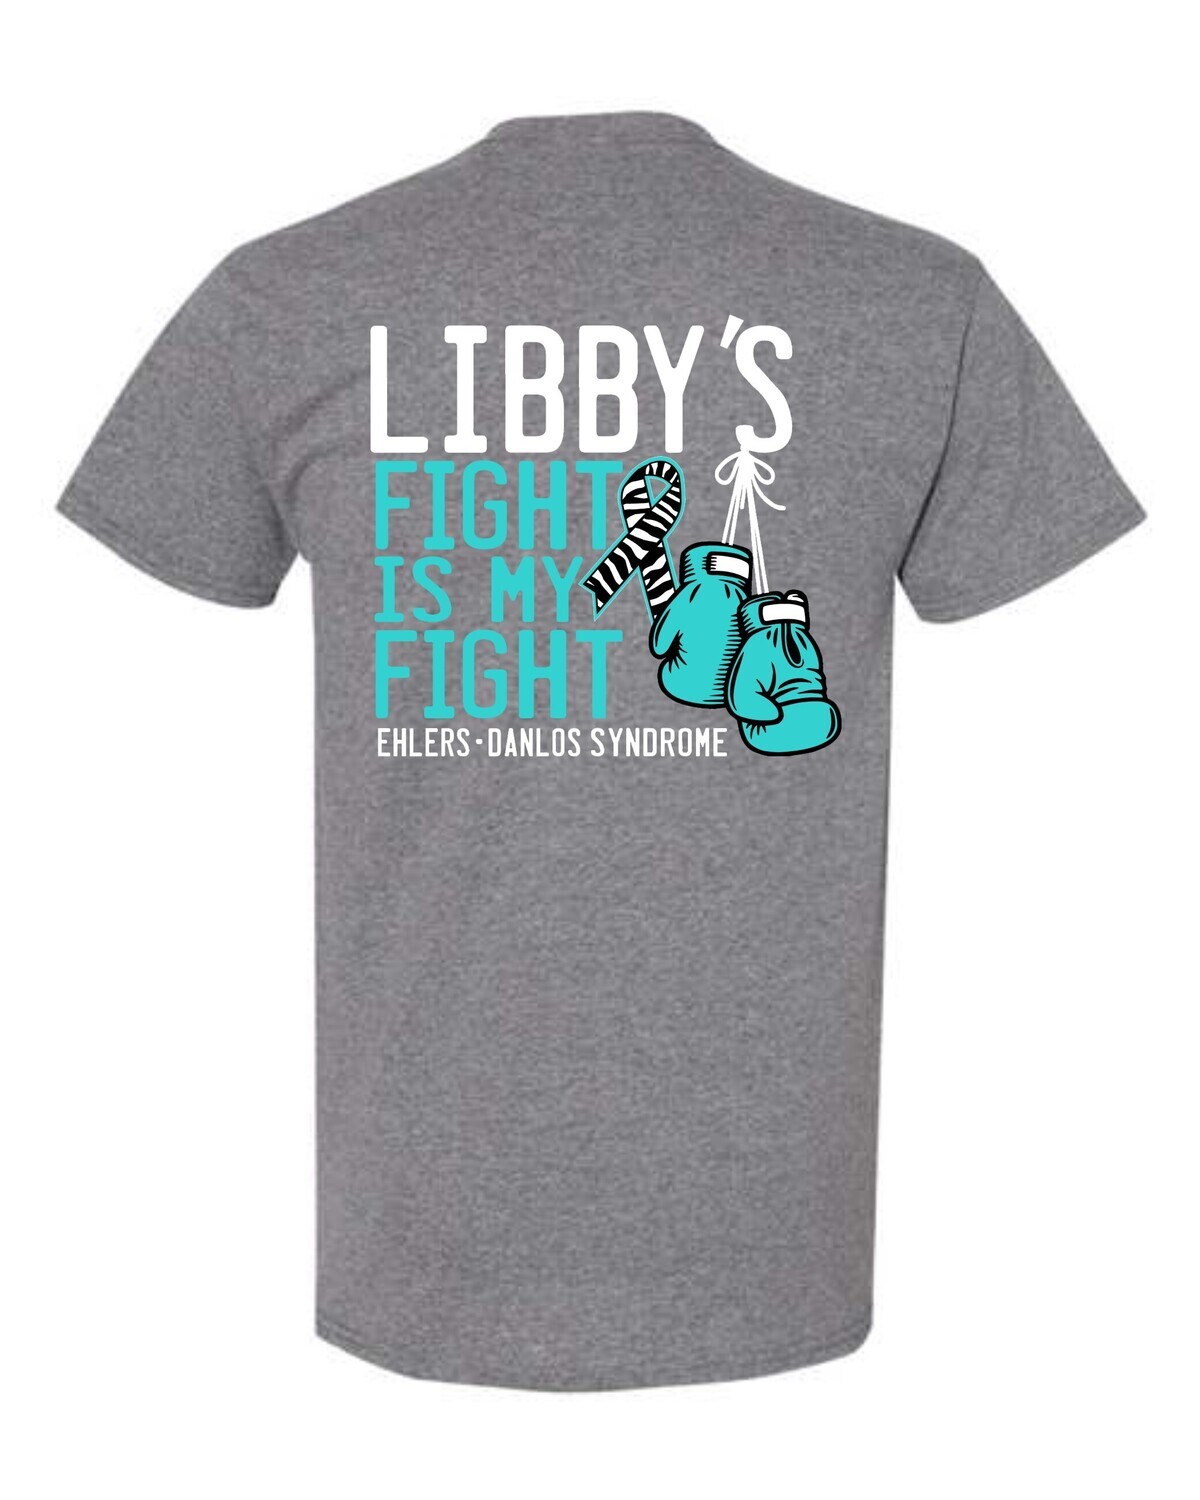 LIBBY'S FIGHT-5000 GRAPHITE HEATHER UNI-SEX T-SHIRT (BACK PRINT ONLY)